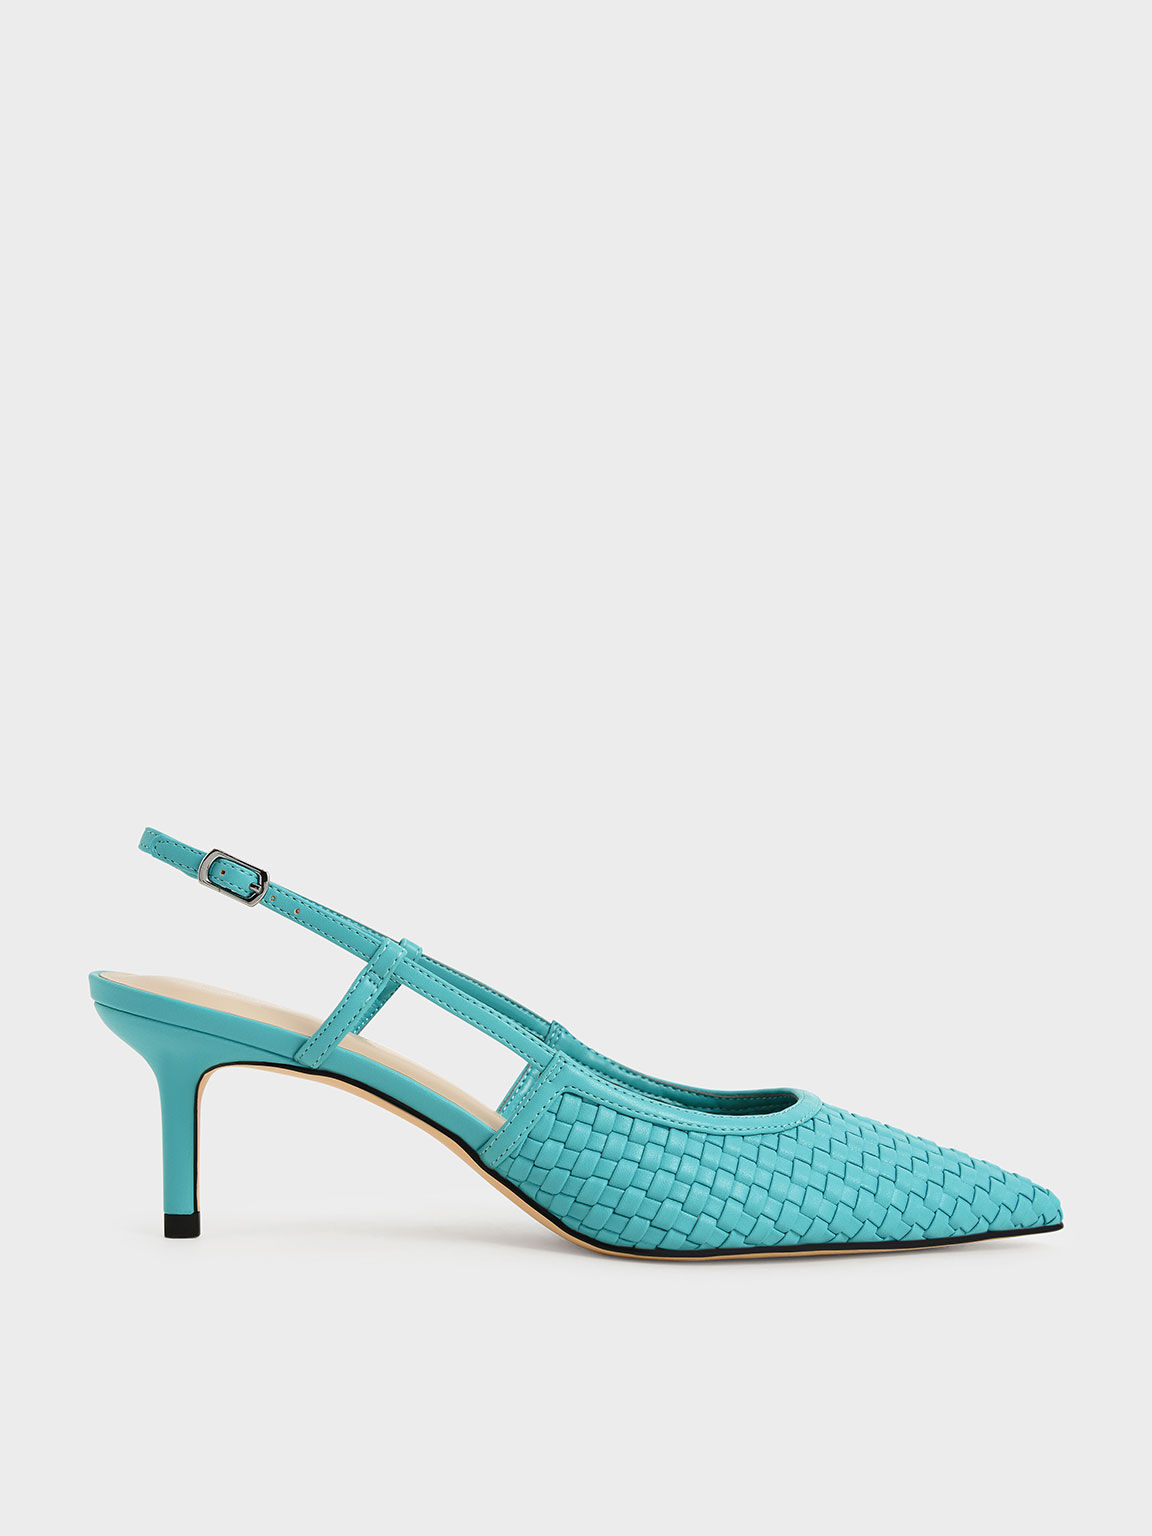 Turquoise high heels - High heels daily